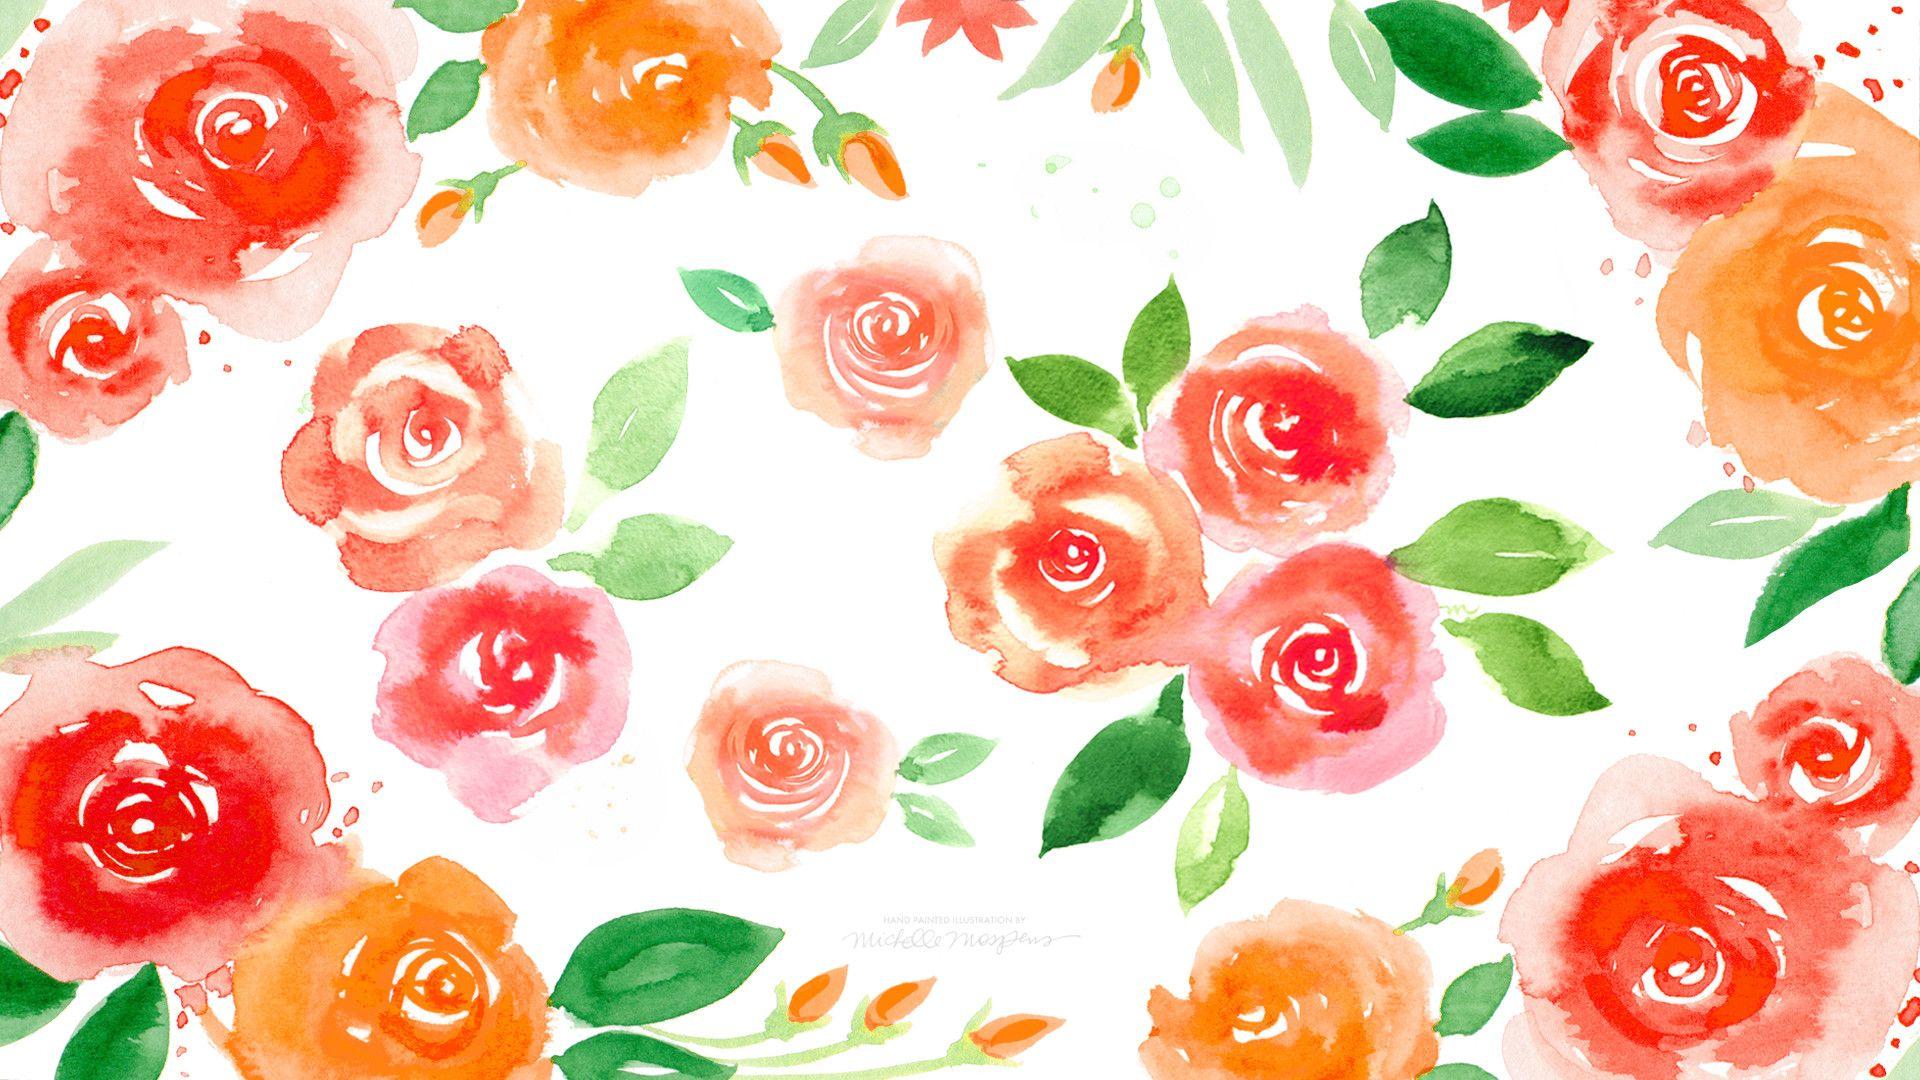 Watercolor Floral Background 1920x1080